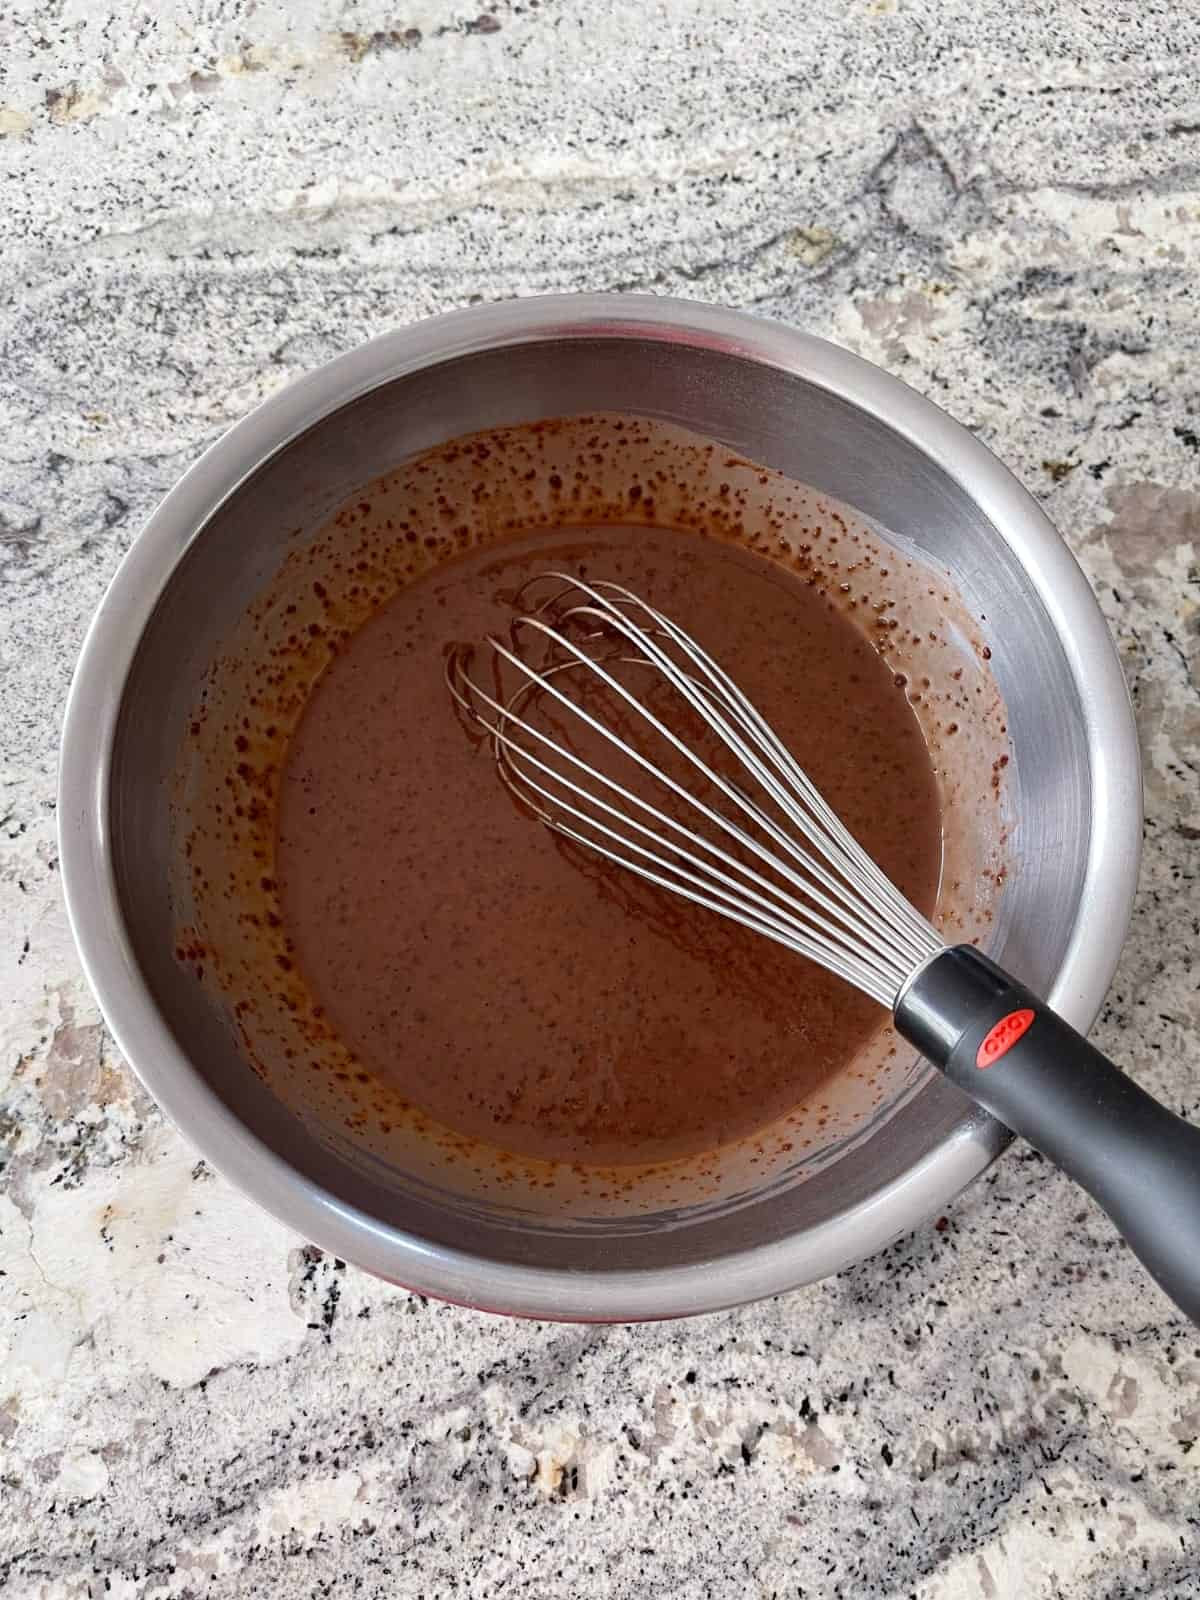 Whisking sugar-free instant chocolate pudding mix and almond milk in mixing bowl.